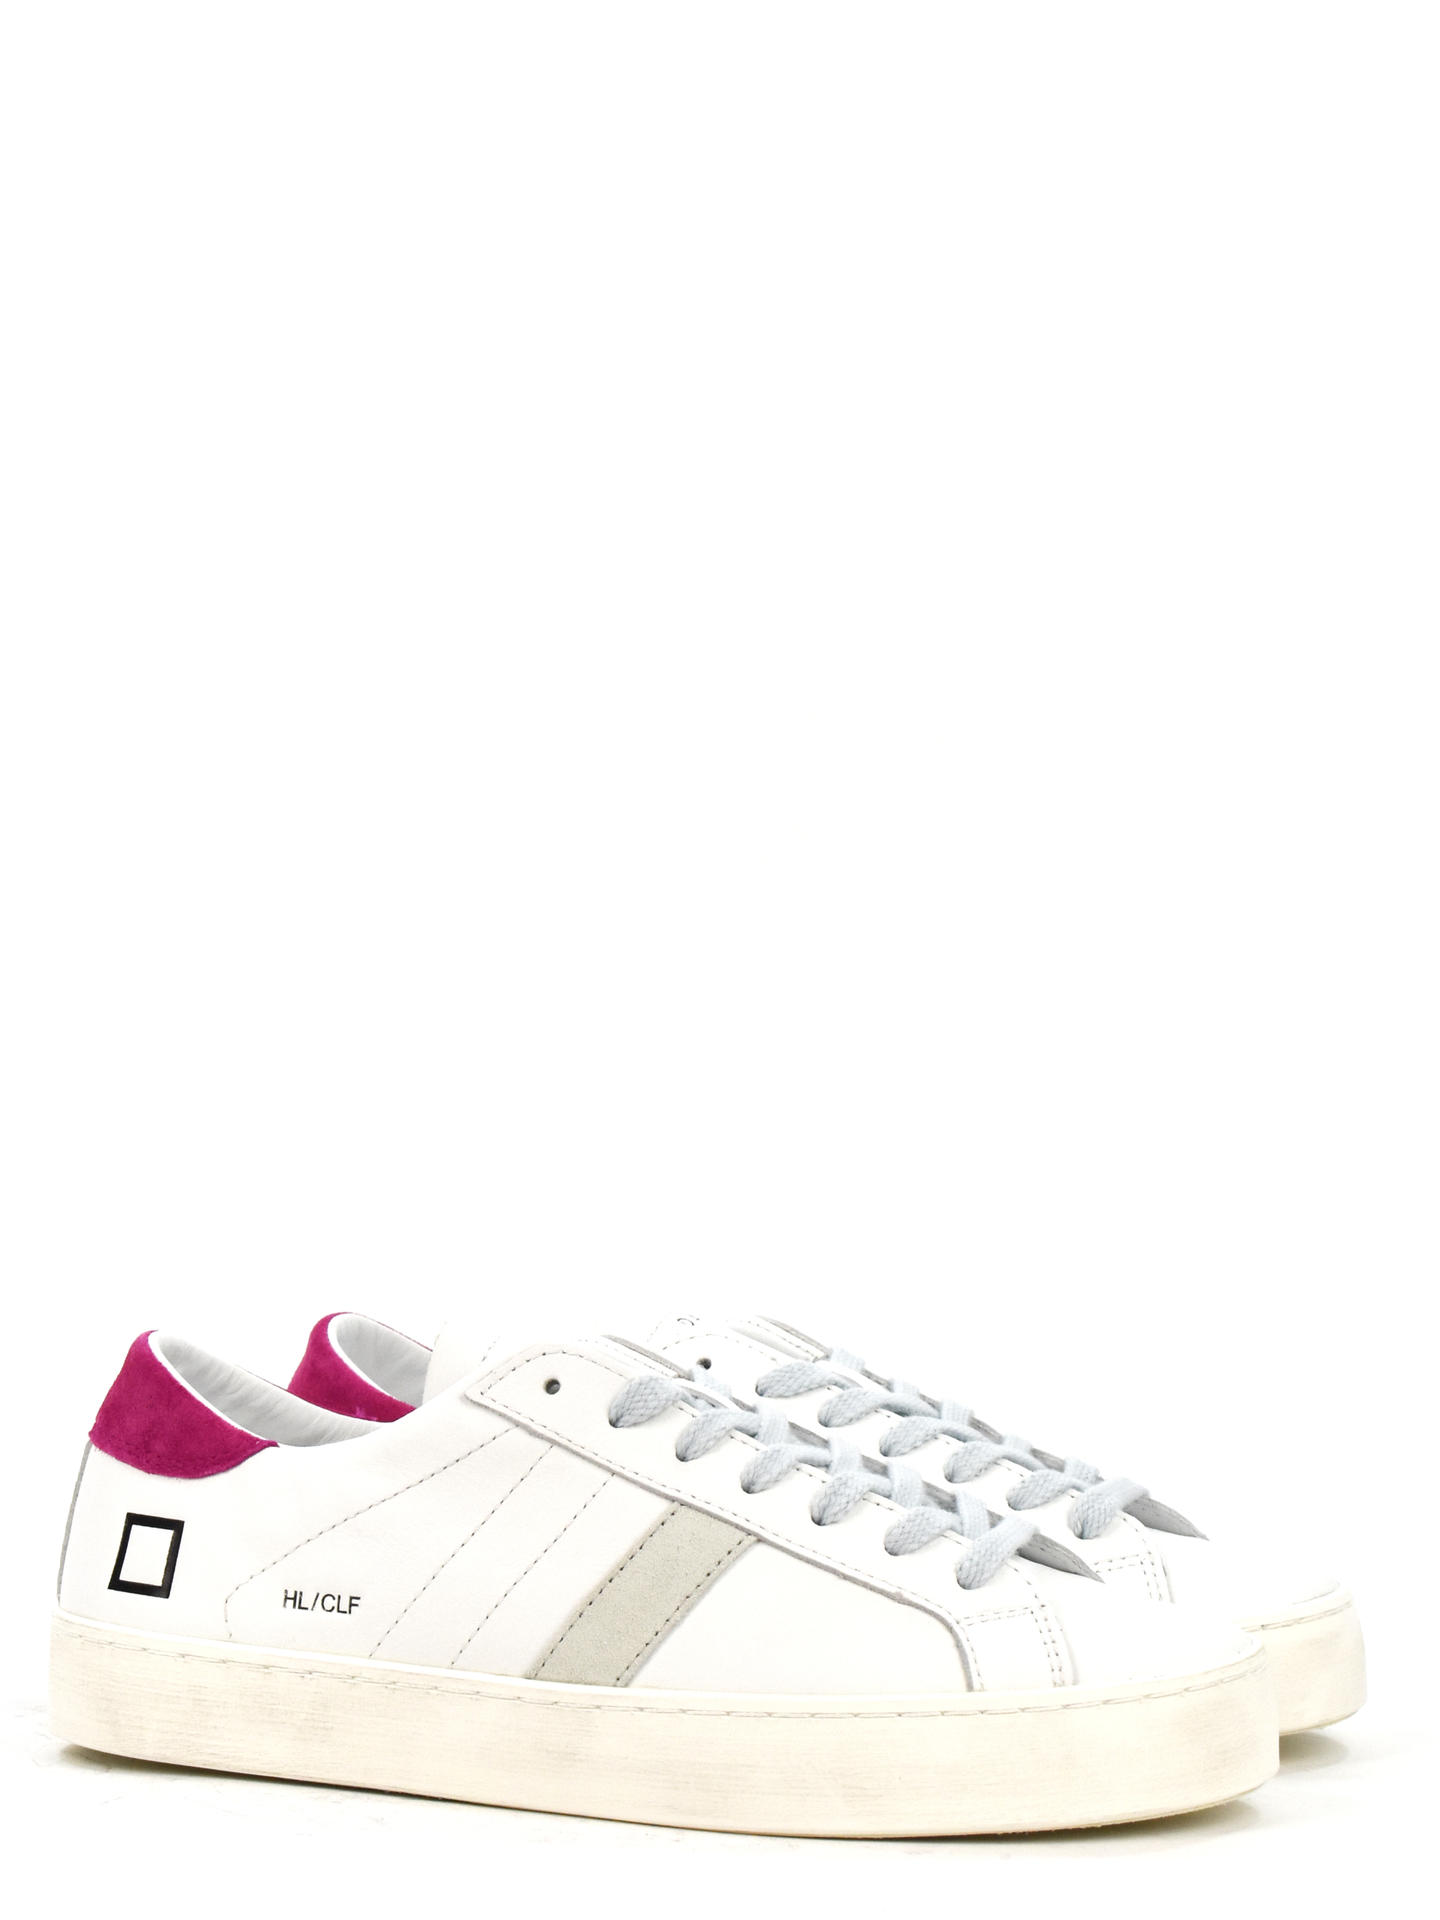 SNEAKERS D.A.T.E HLCAWF BIANCO/FUCSIA